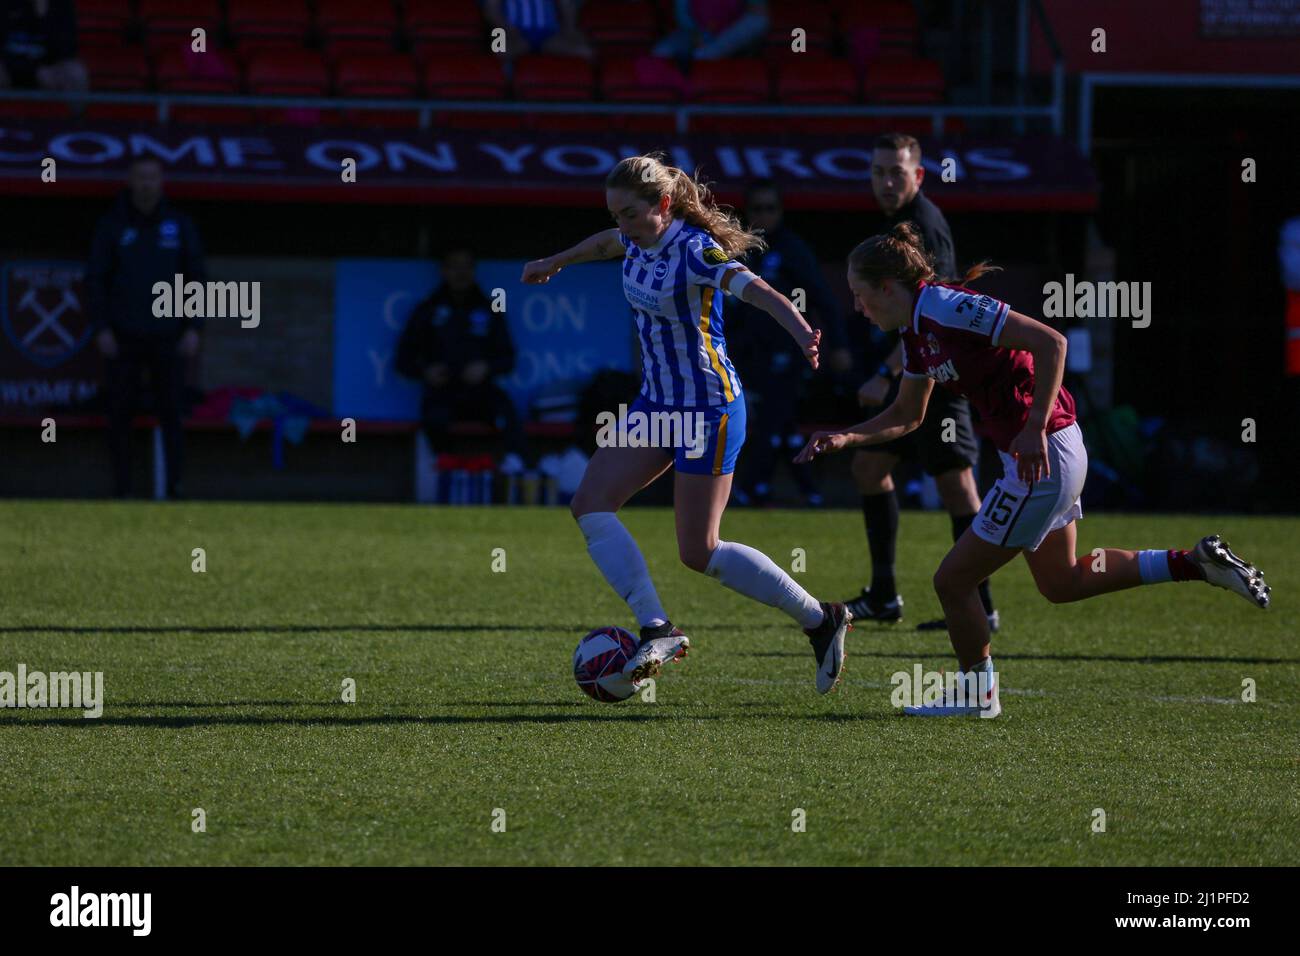 London, UK. 27th Mar, 2022. Megan Connolly (8 Brighton) in action during the FA Womens Super League game between West Ham Utd and Brighton at Chigwell Construction Stadium in London, England Credit: SPP Sport Press Photo. /Alamy Live News Stock Photo